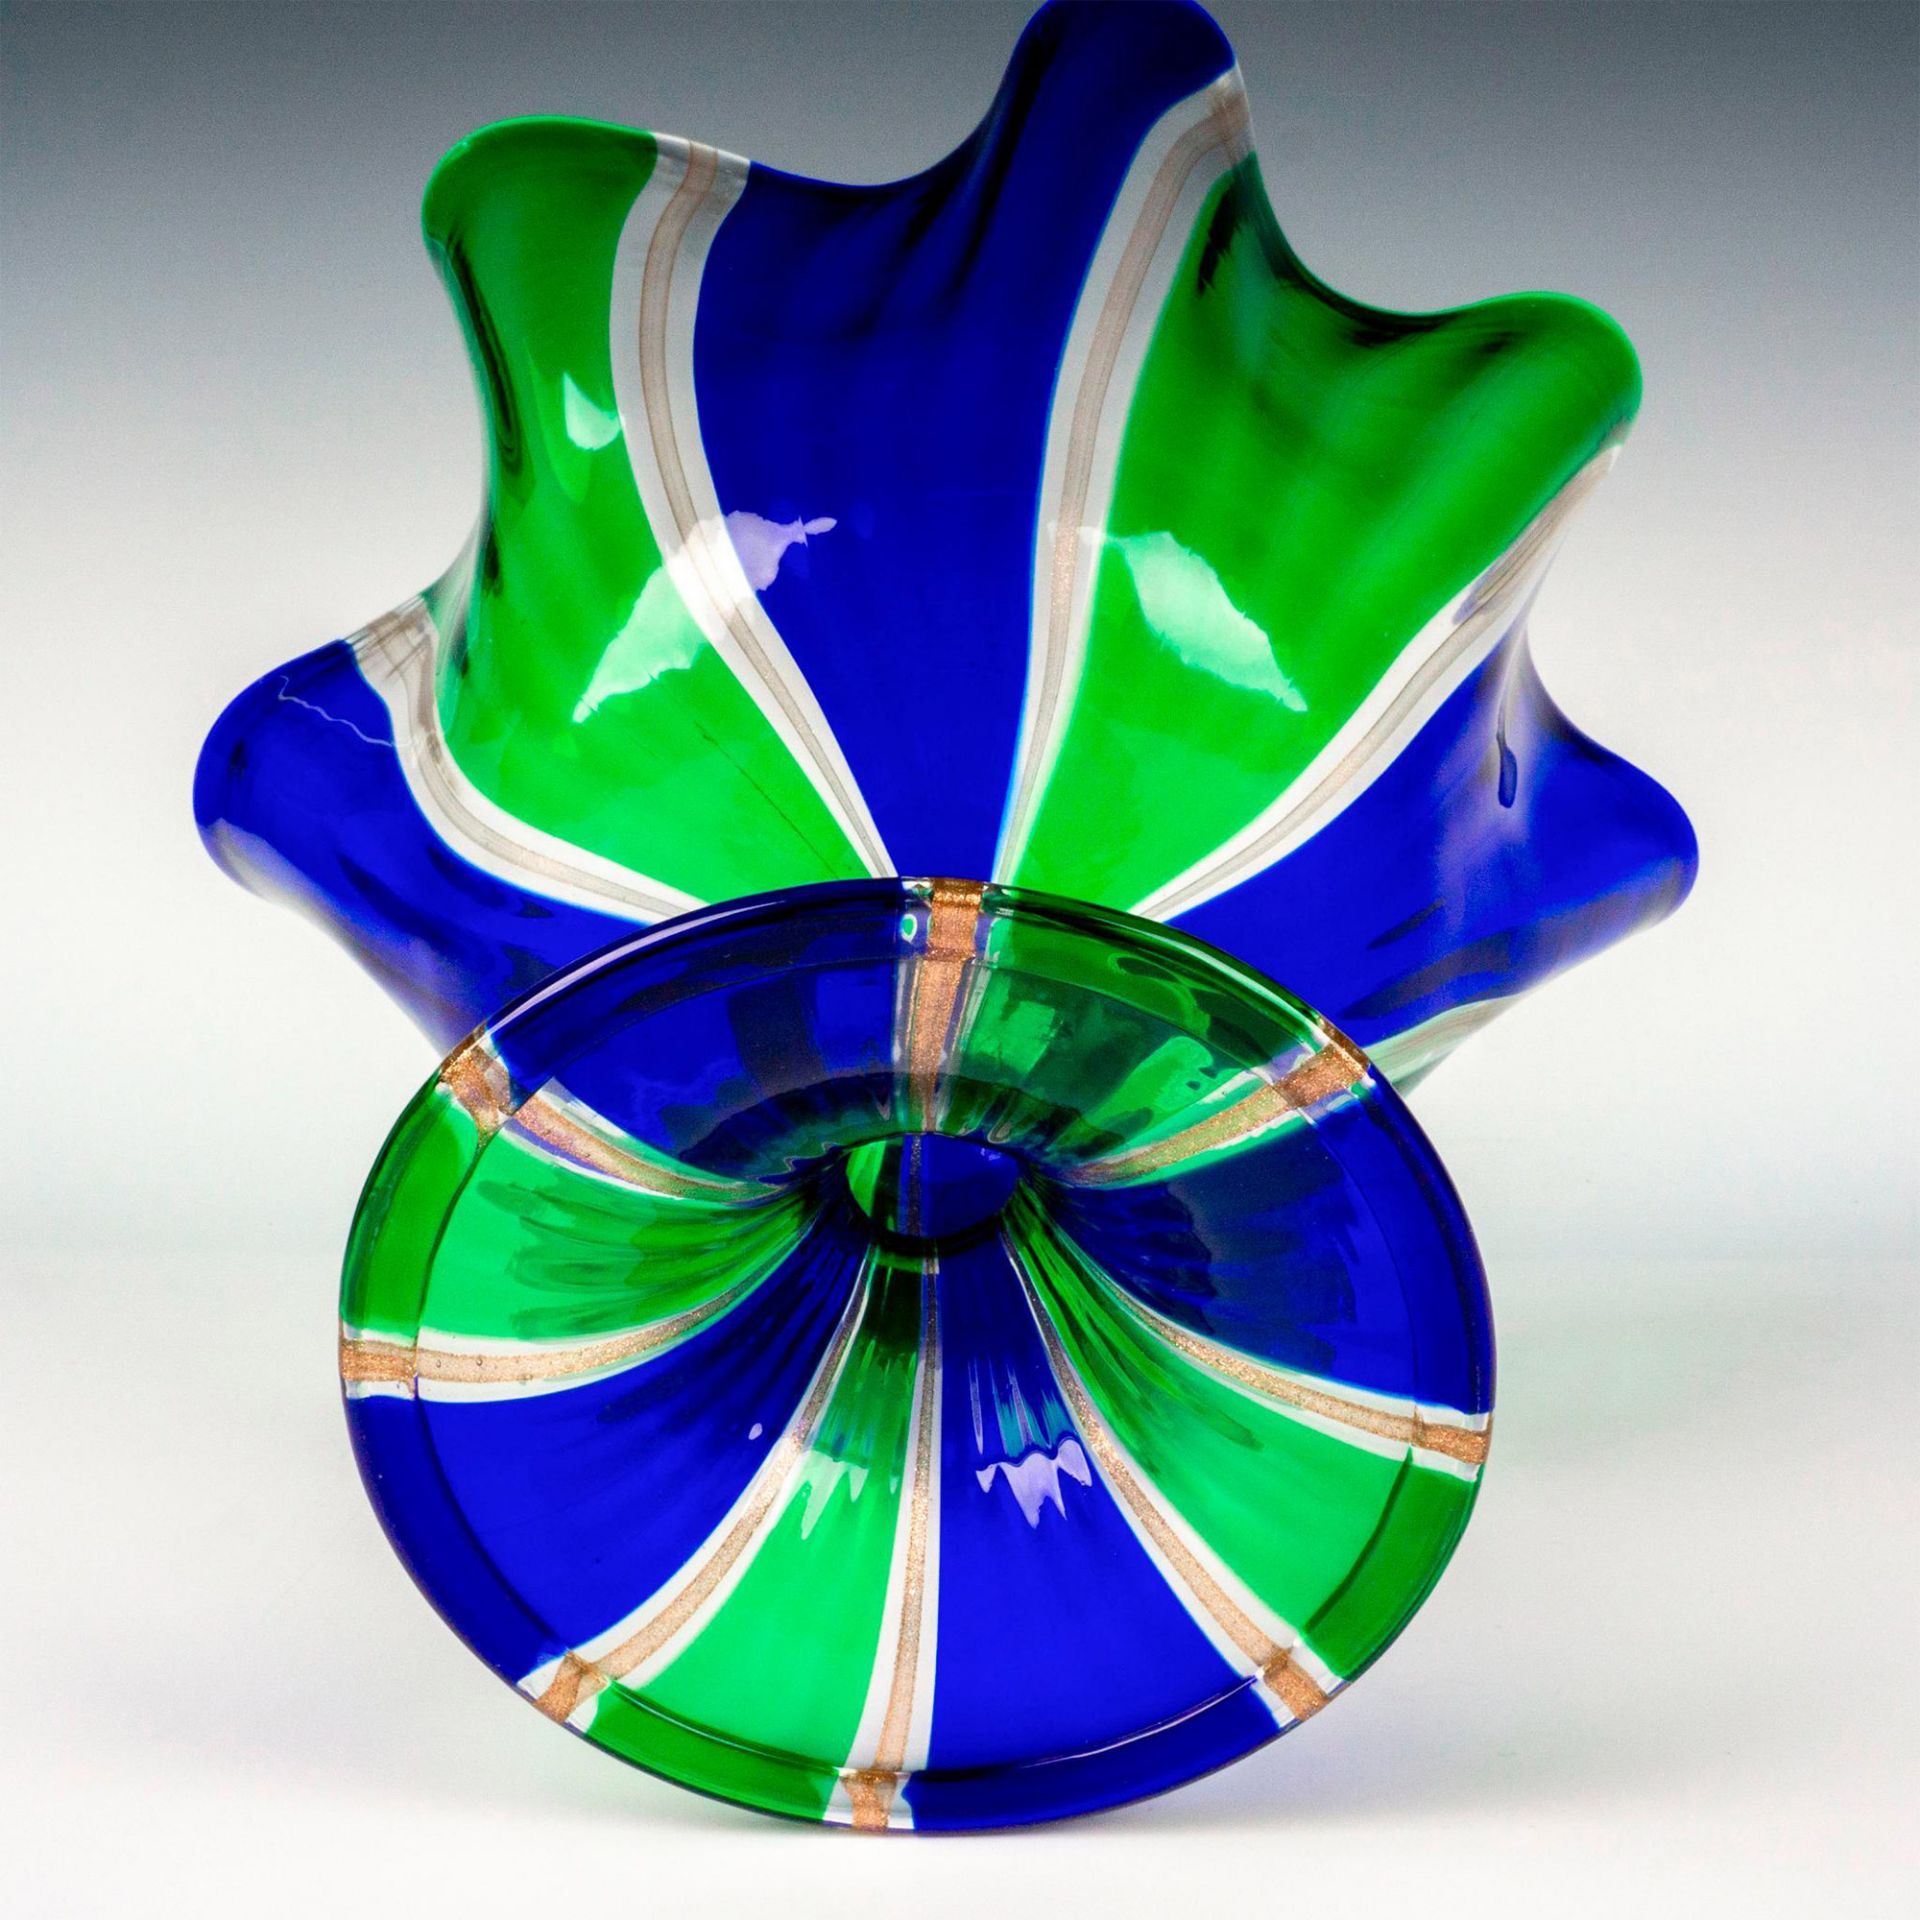 Murano Art Glass Footed Bowl, Cane - Image 3 of 3